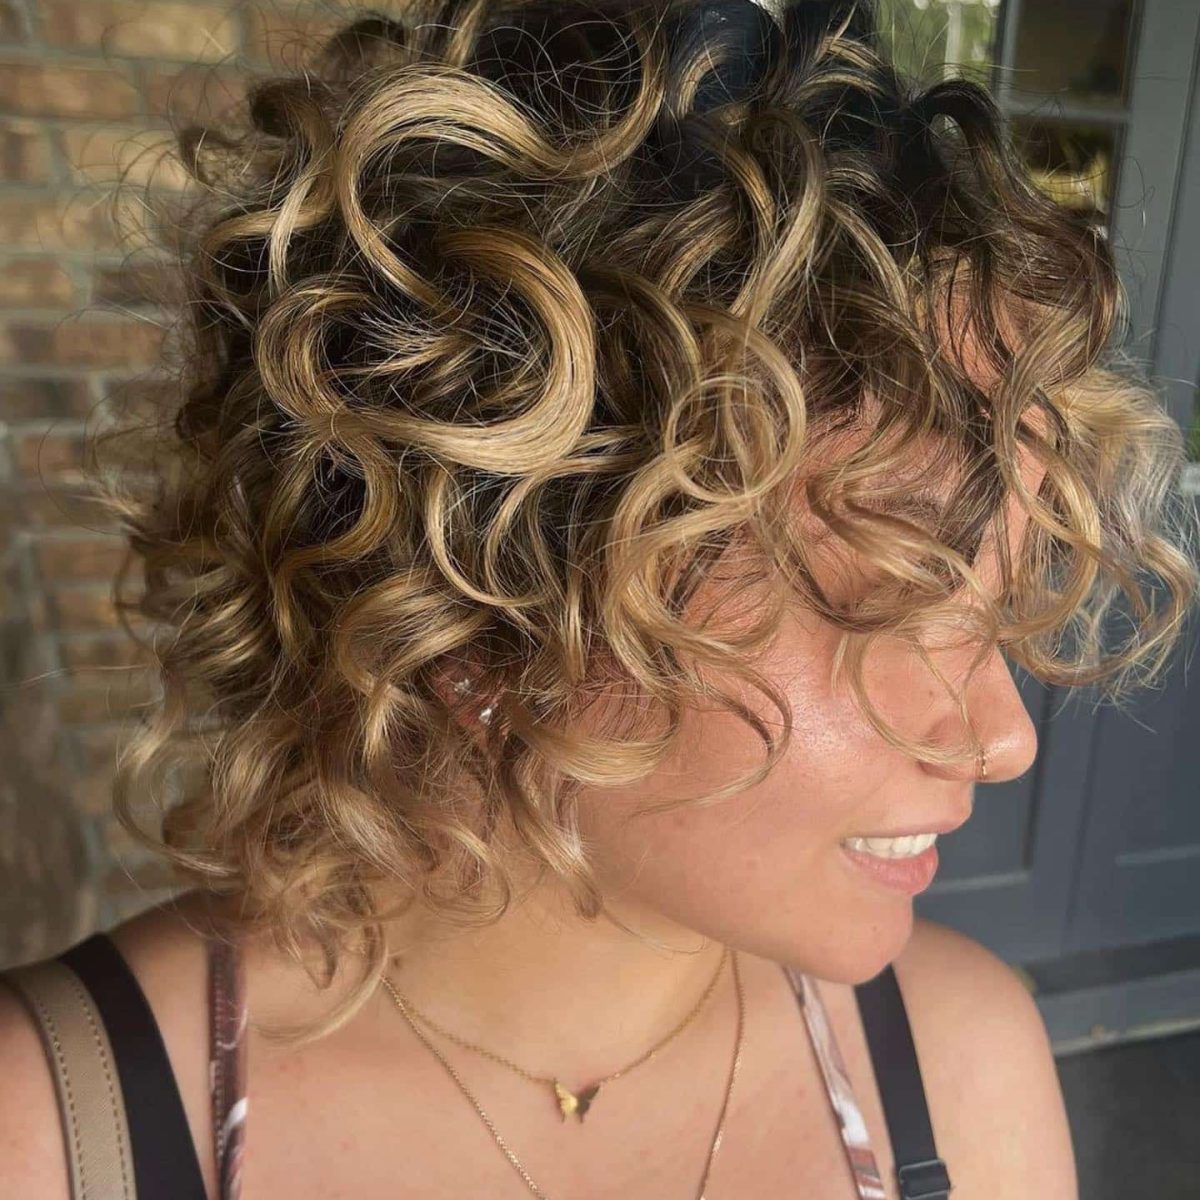 Woman with curly hair and new balayage coloring.